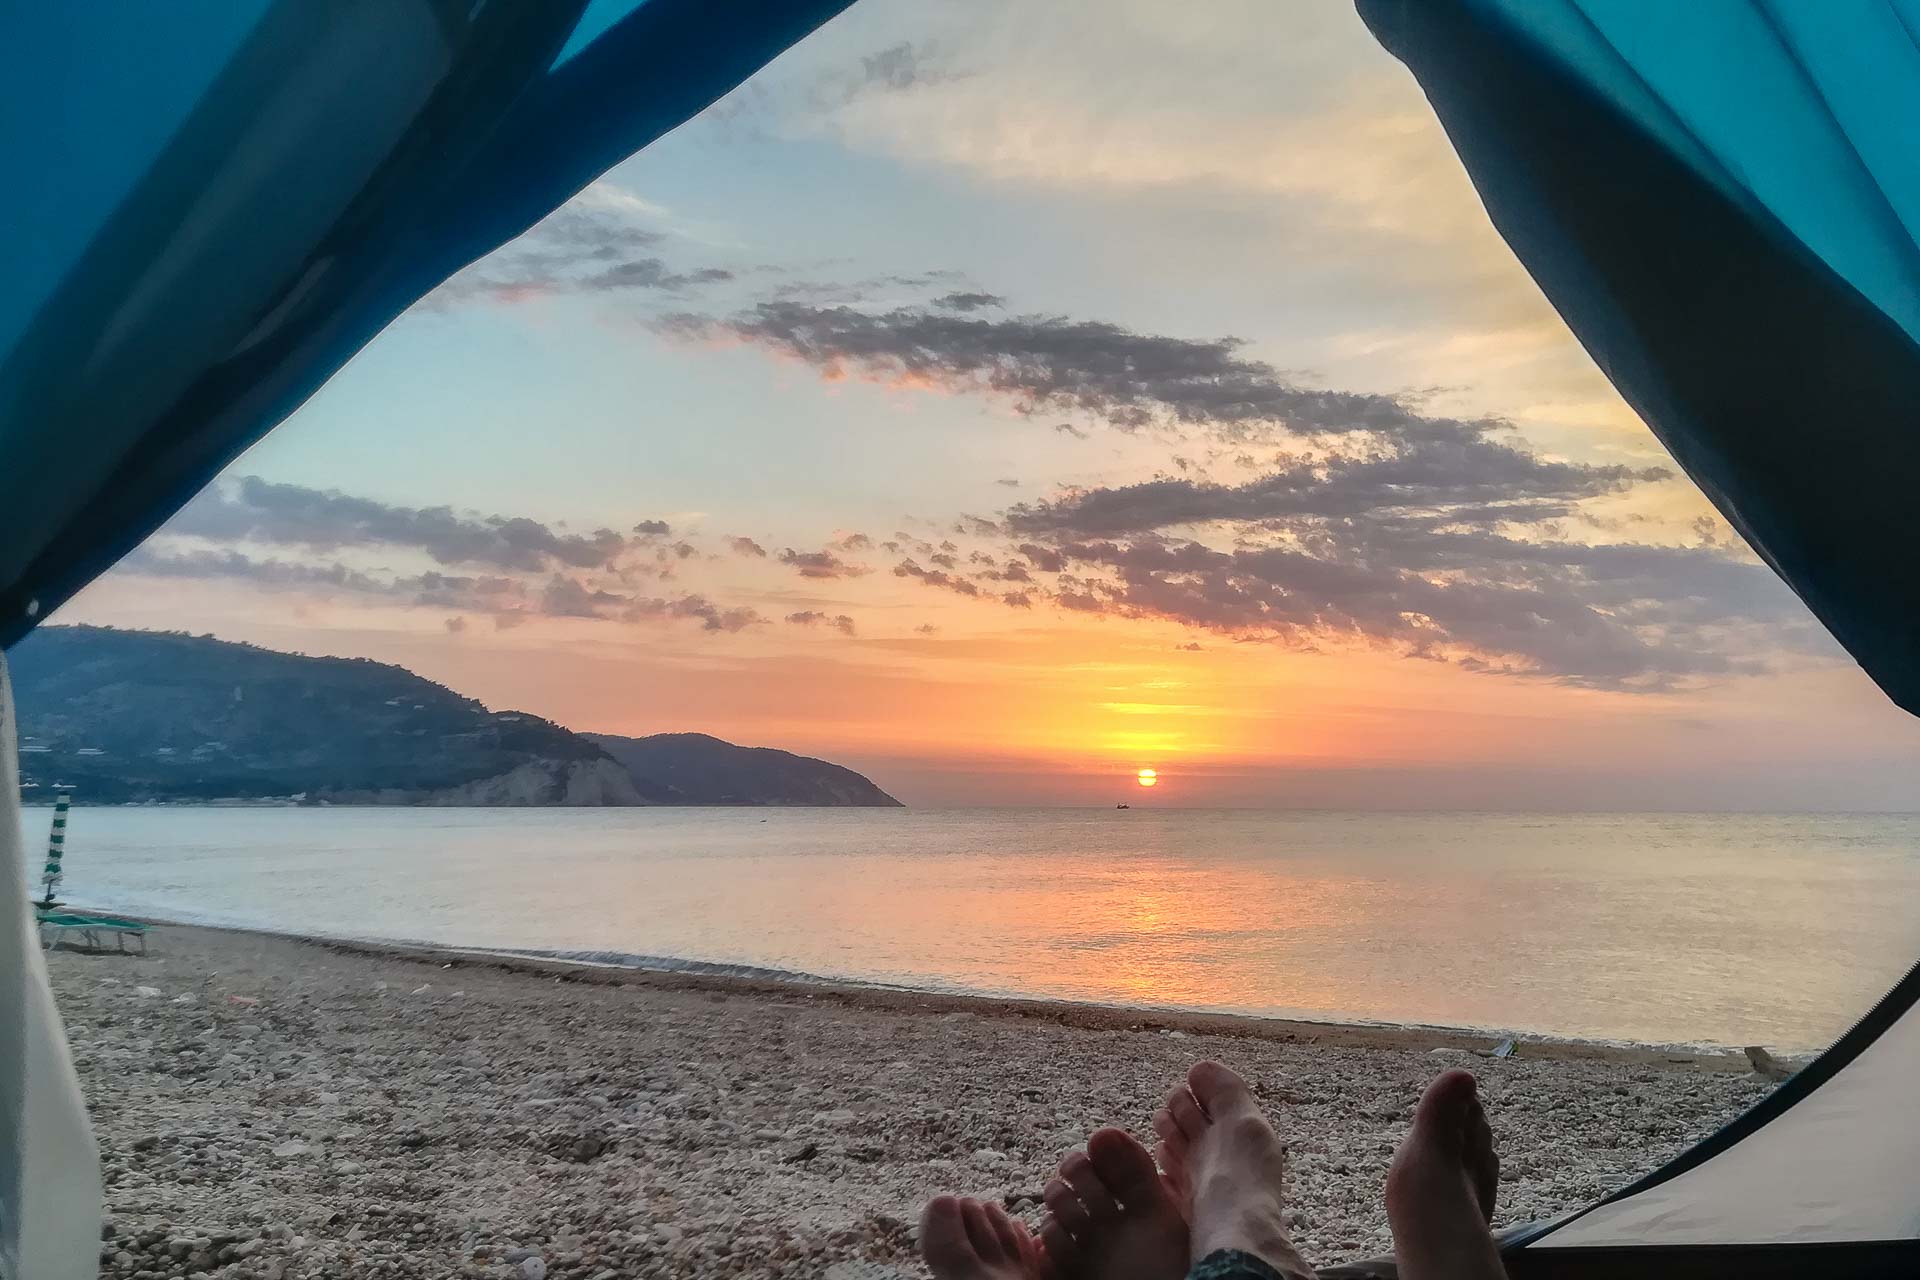 The sun rising from the inside a tent showing our feet